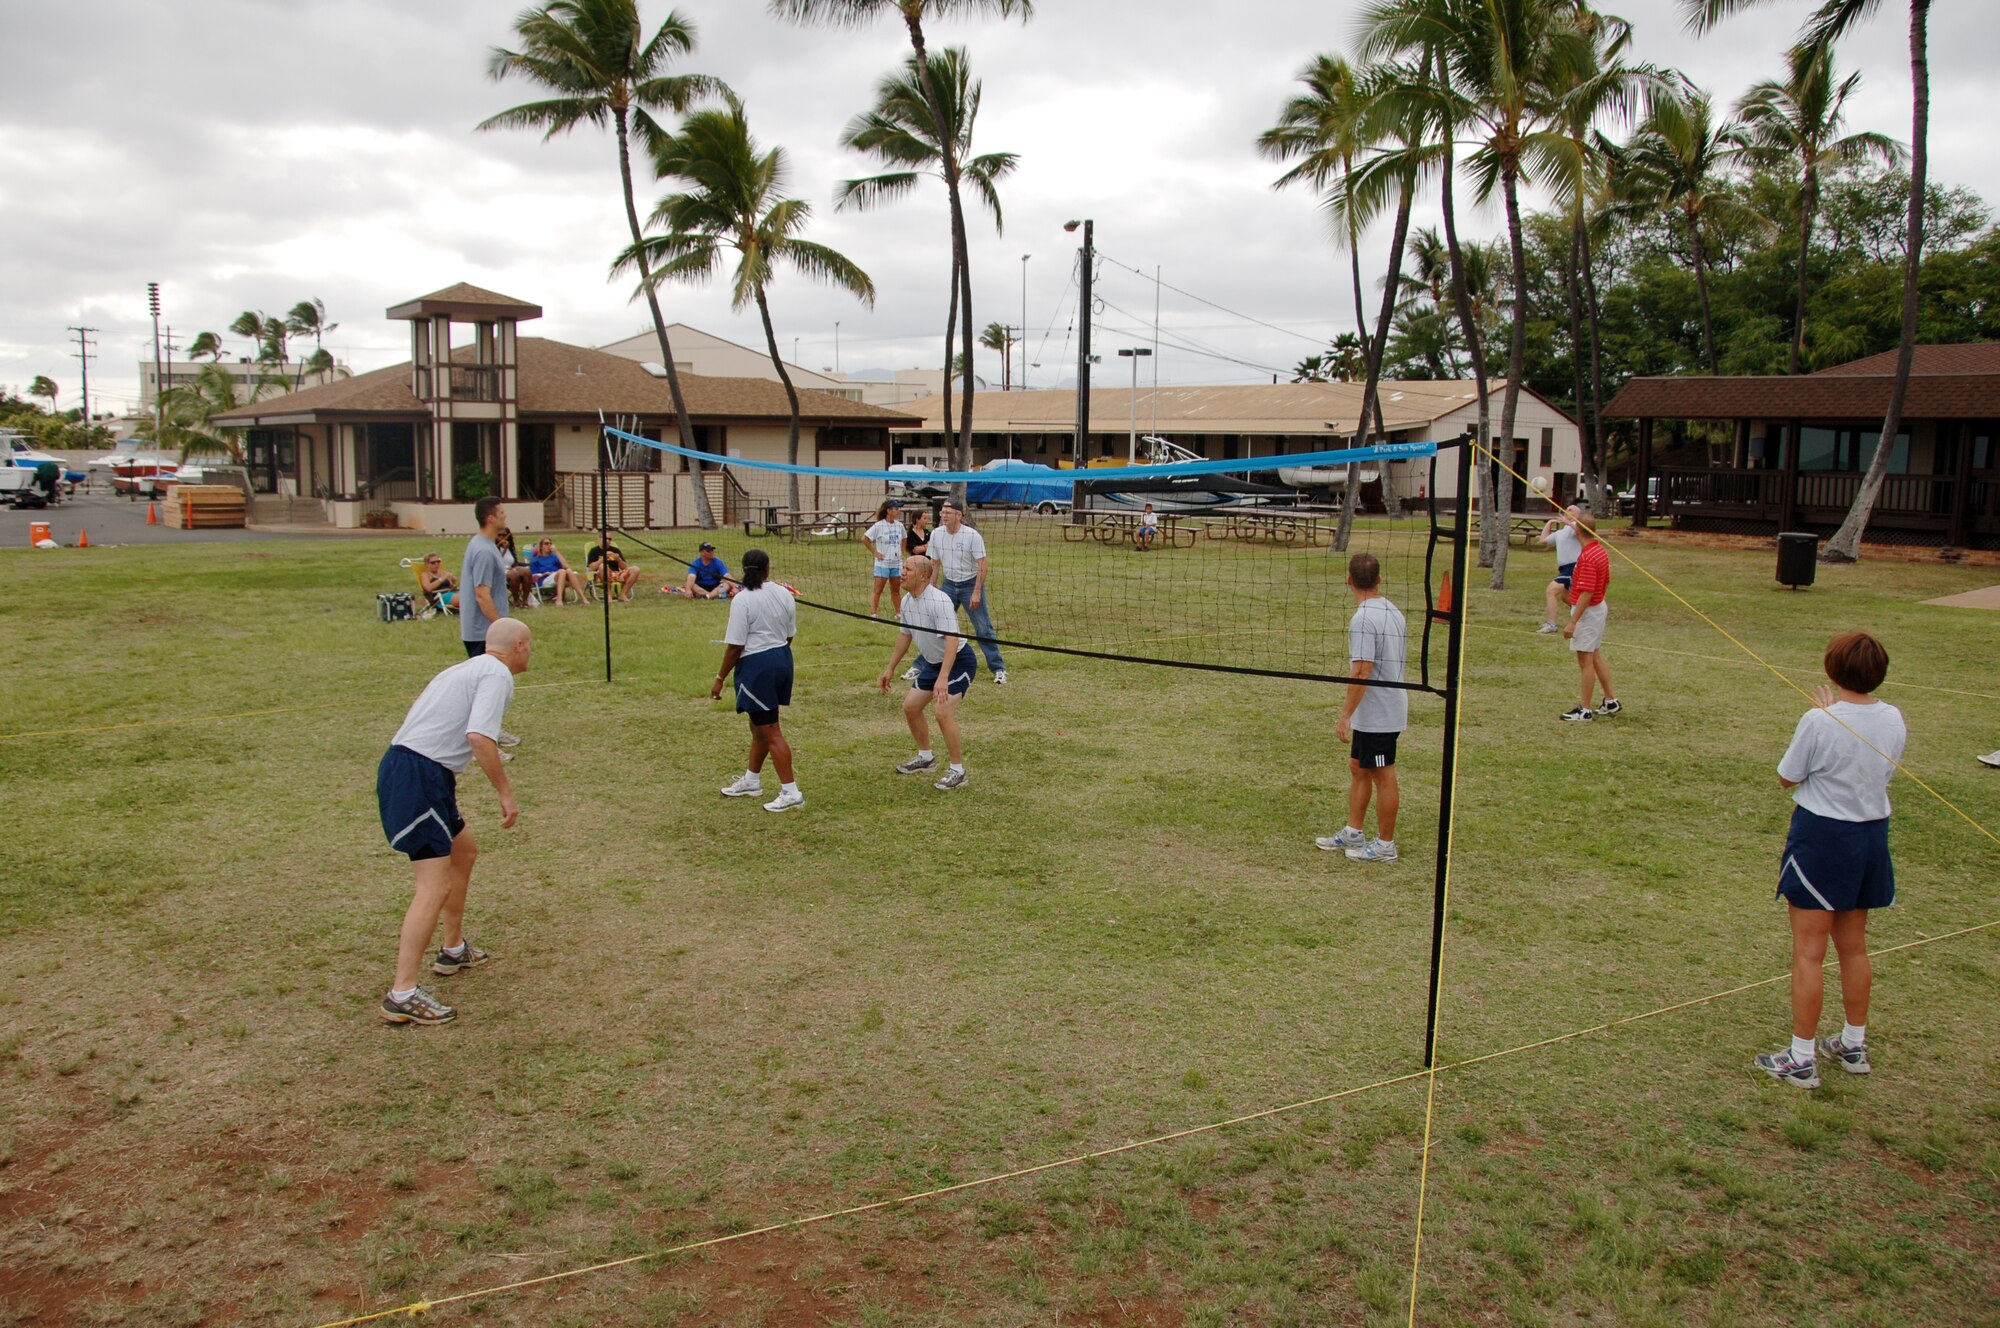 The Chiefs (left) prepare to return a serve from the Eagles during the annual "Chiefs vs. Eagles" volleyball game during Team HIckam Sports Day April 16. The Chiefs defeated the Eagles two games to zero. (U.S. Air Force photo by Senior Airman Nathan Allen)